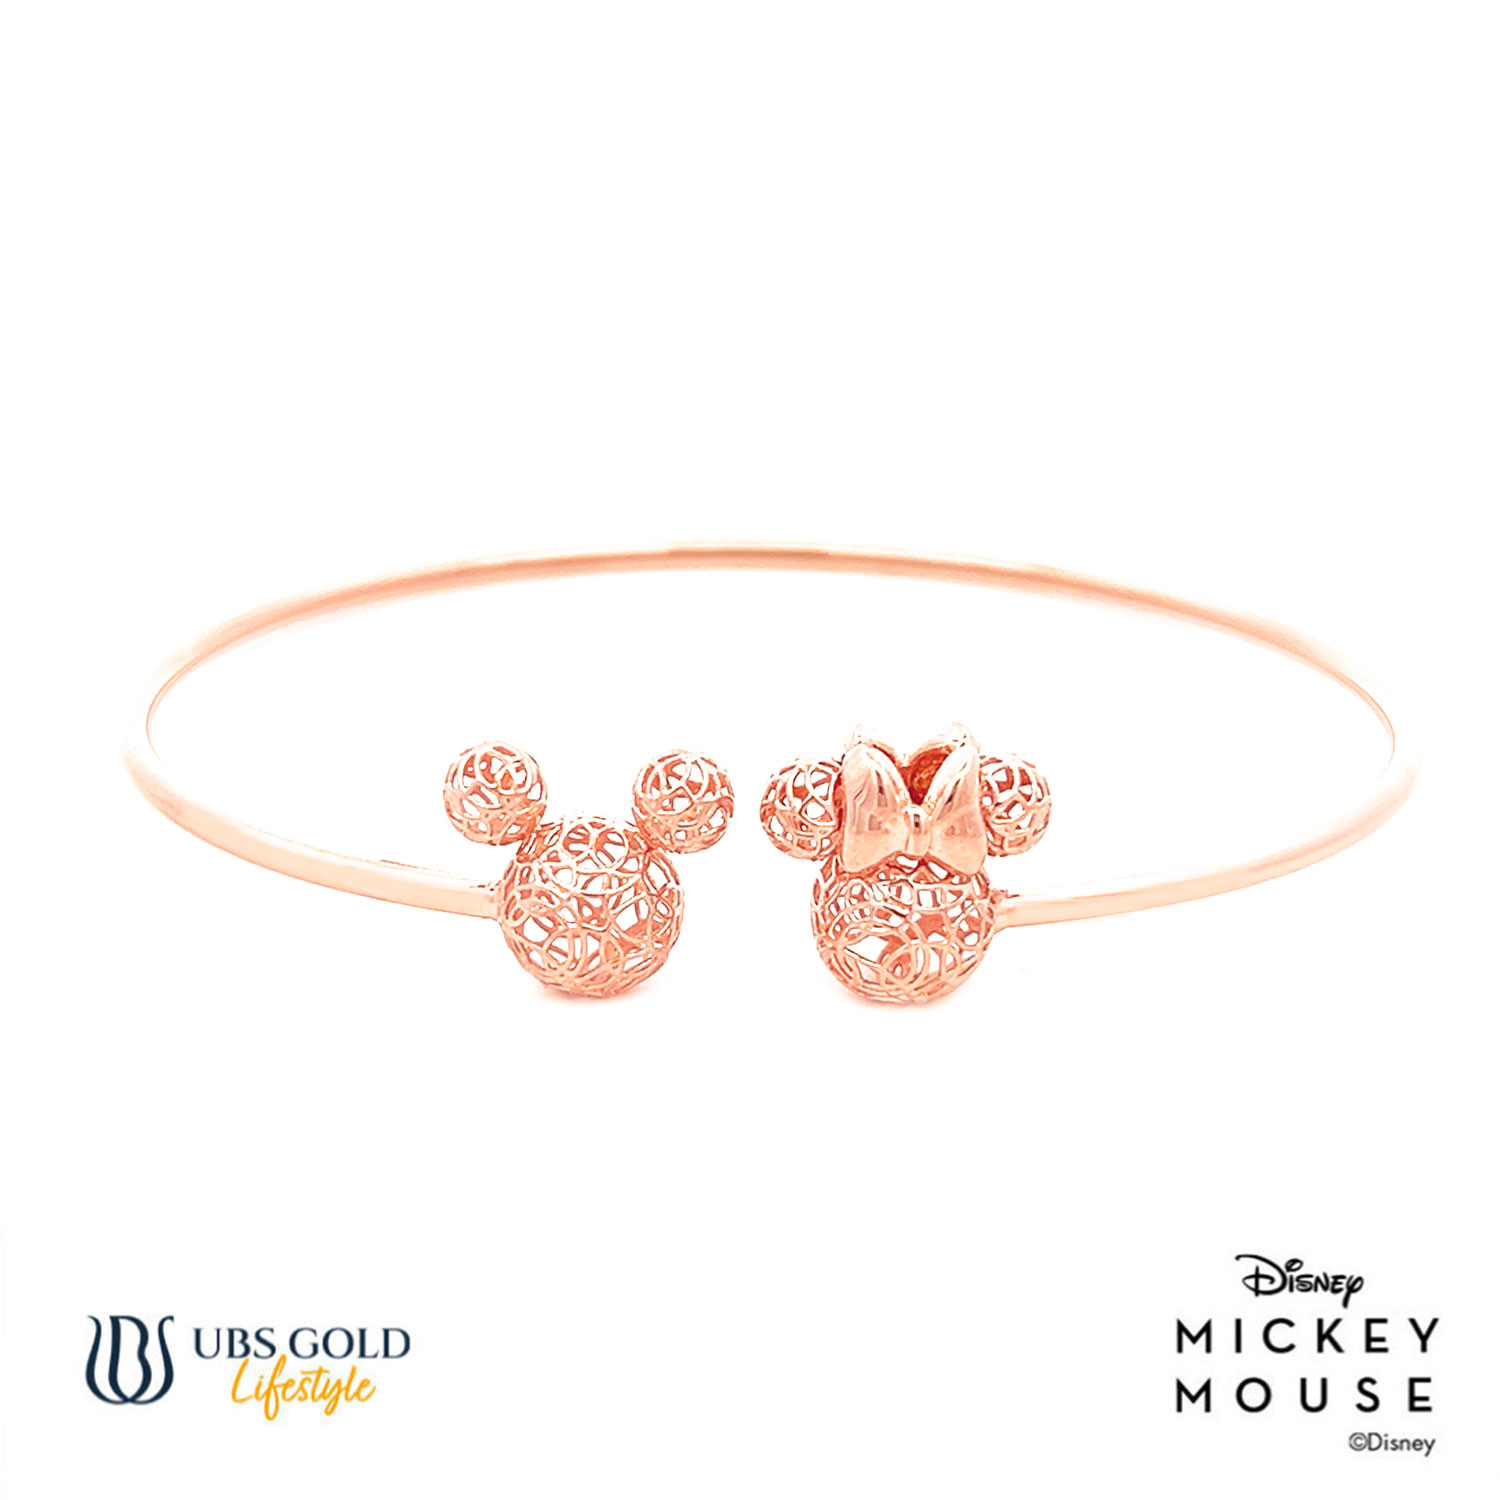 UBS Gold Gelang Emas Disney Mickey Minnie Mouse - Vgy0141 - 17K